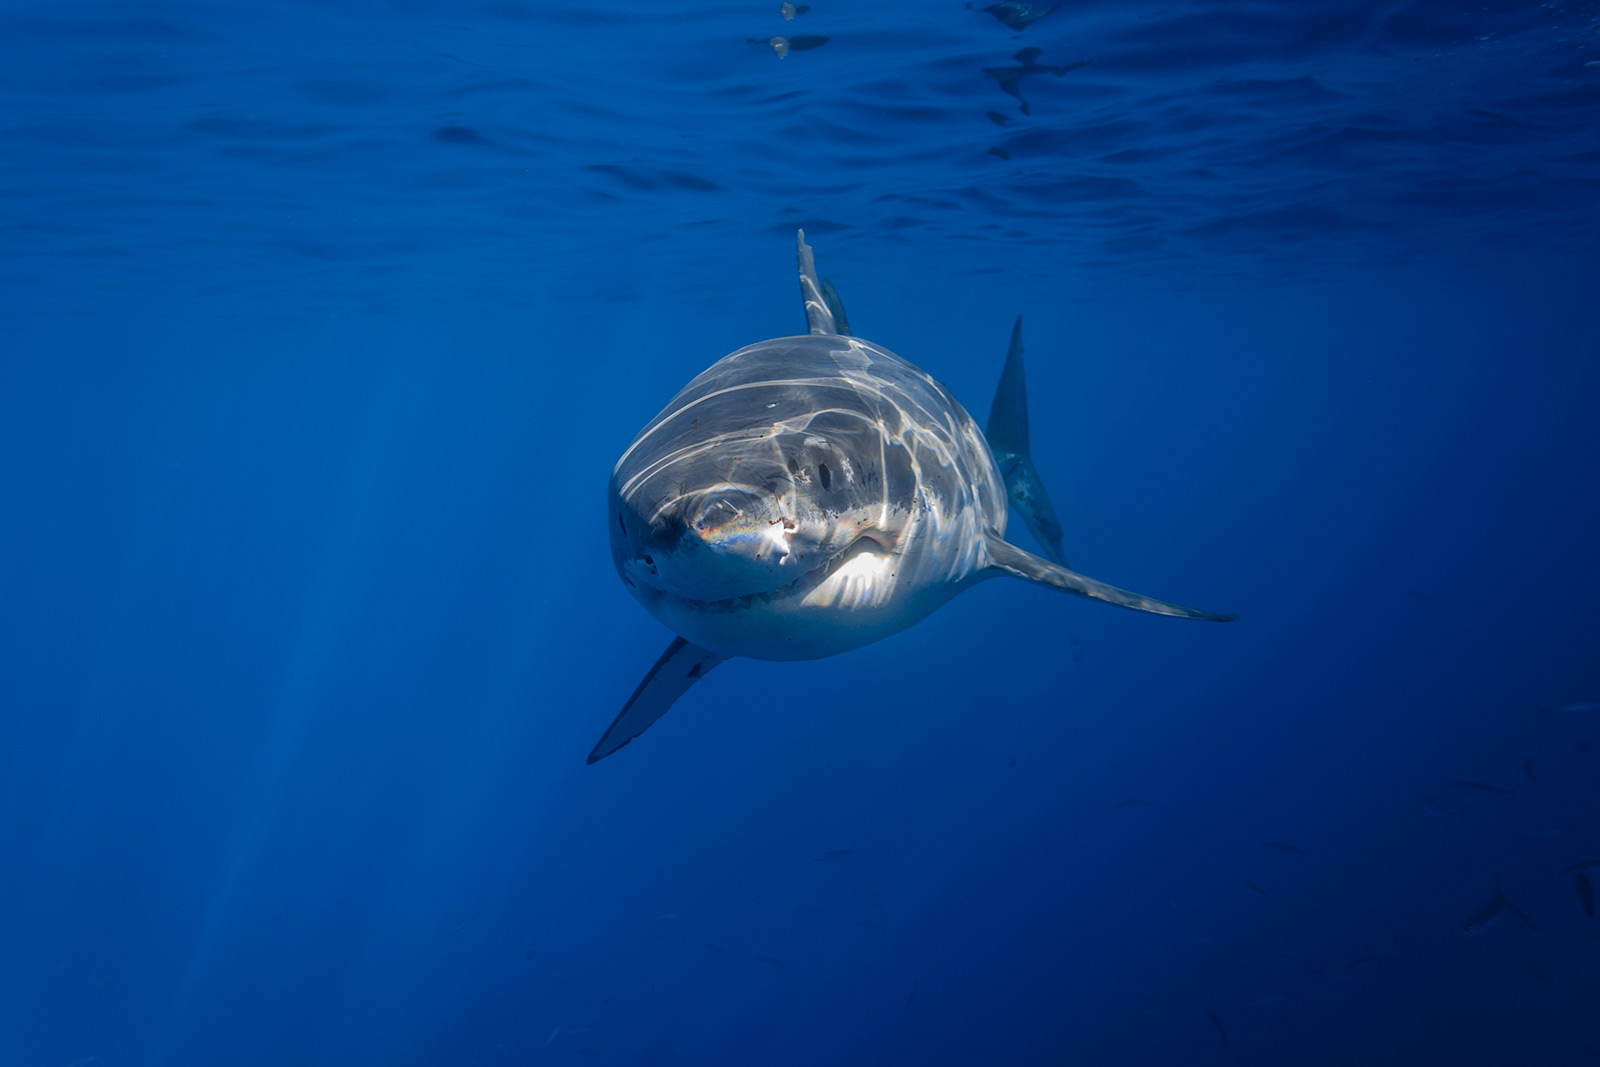 Cal Ripfin, a male great white shark, swims head-on toward the camera image